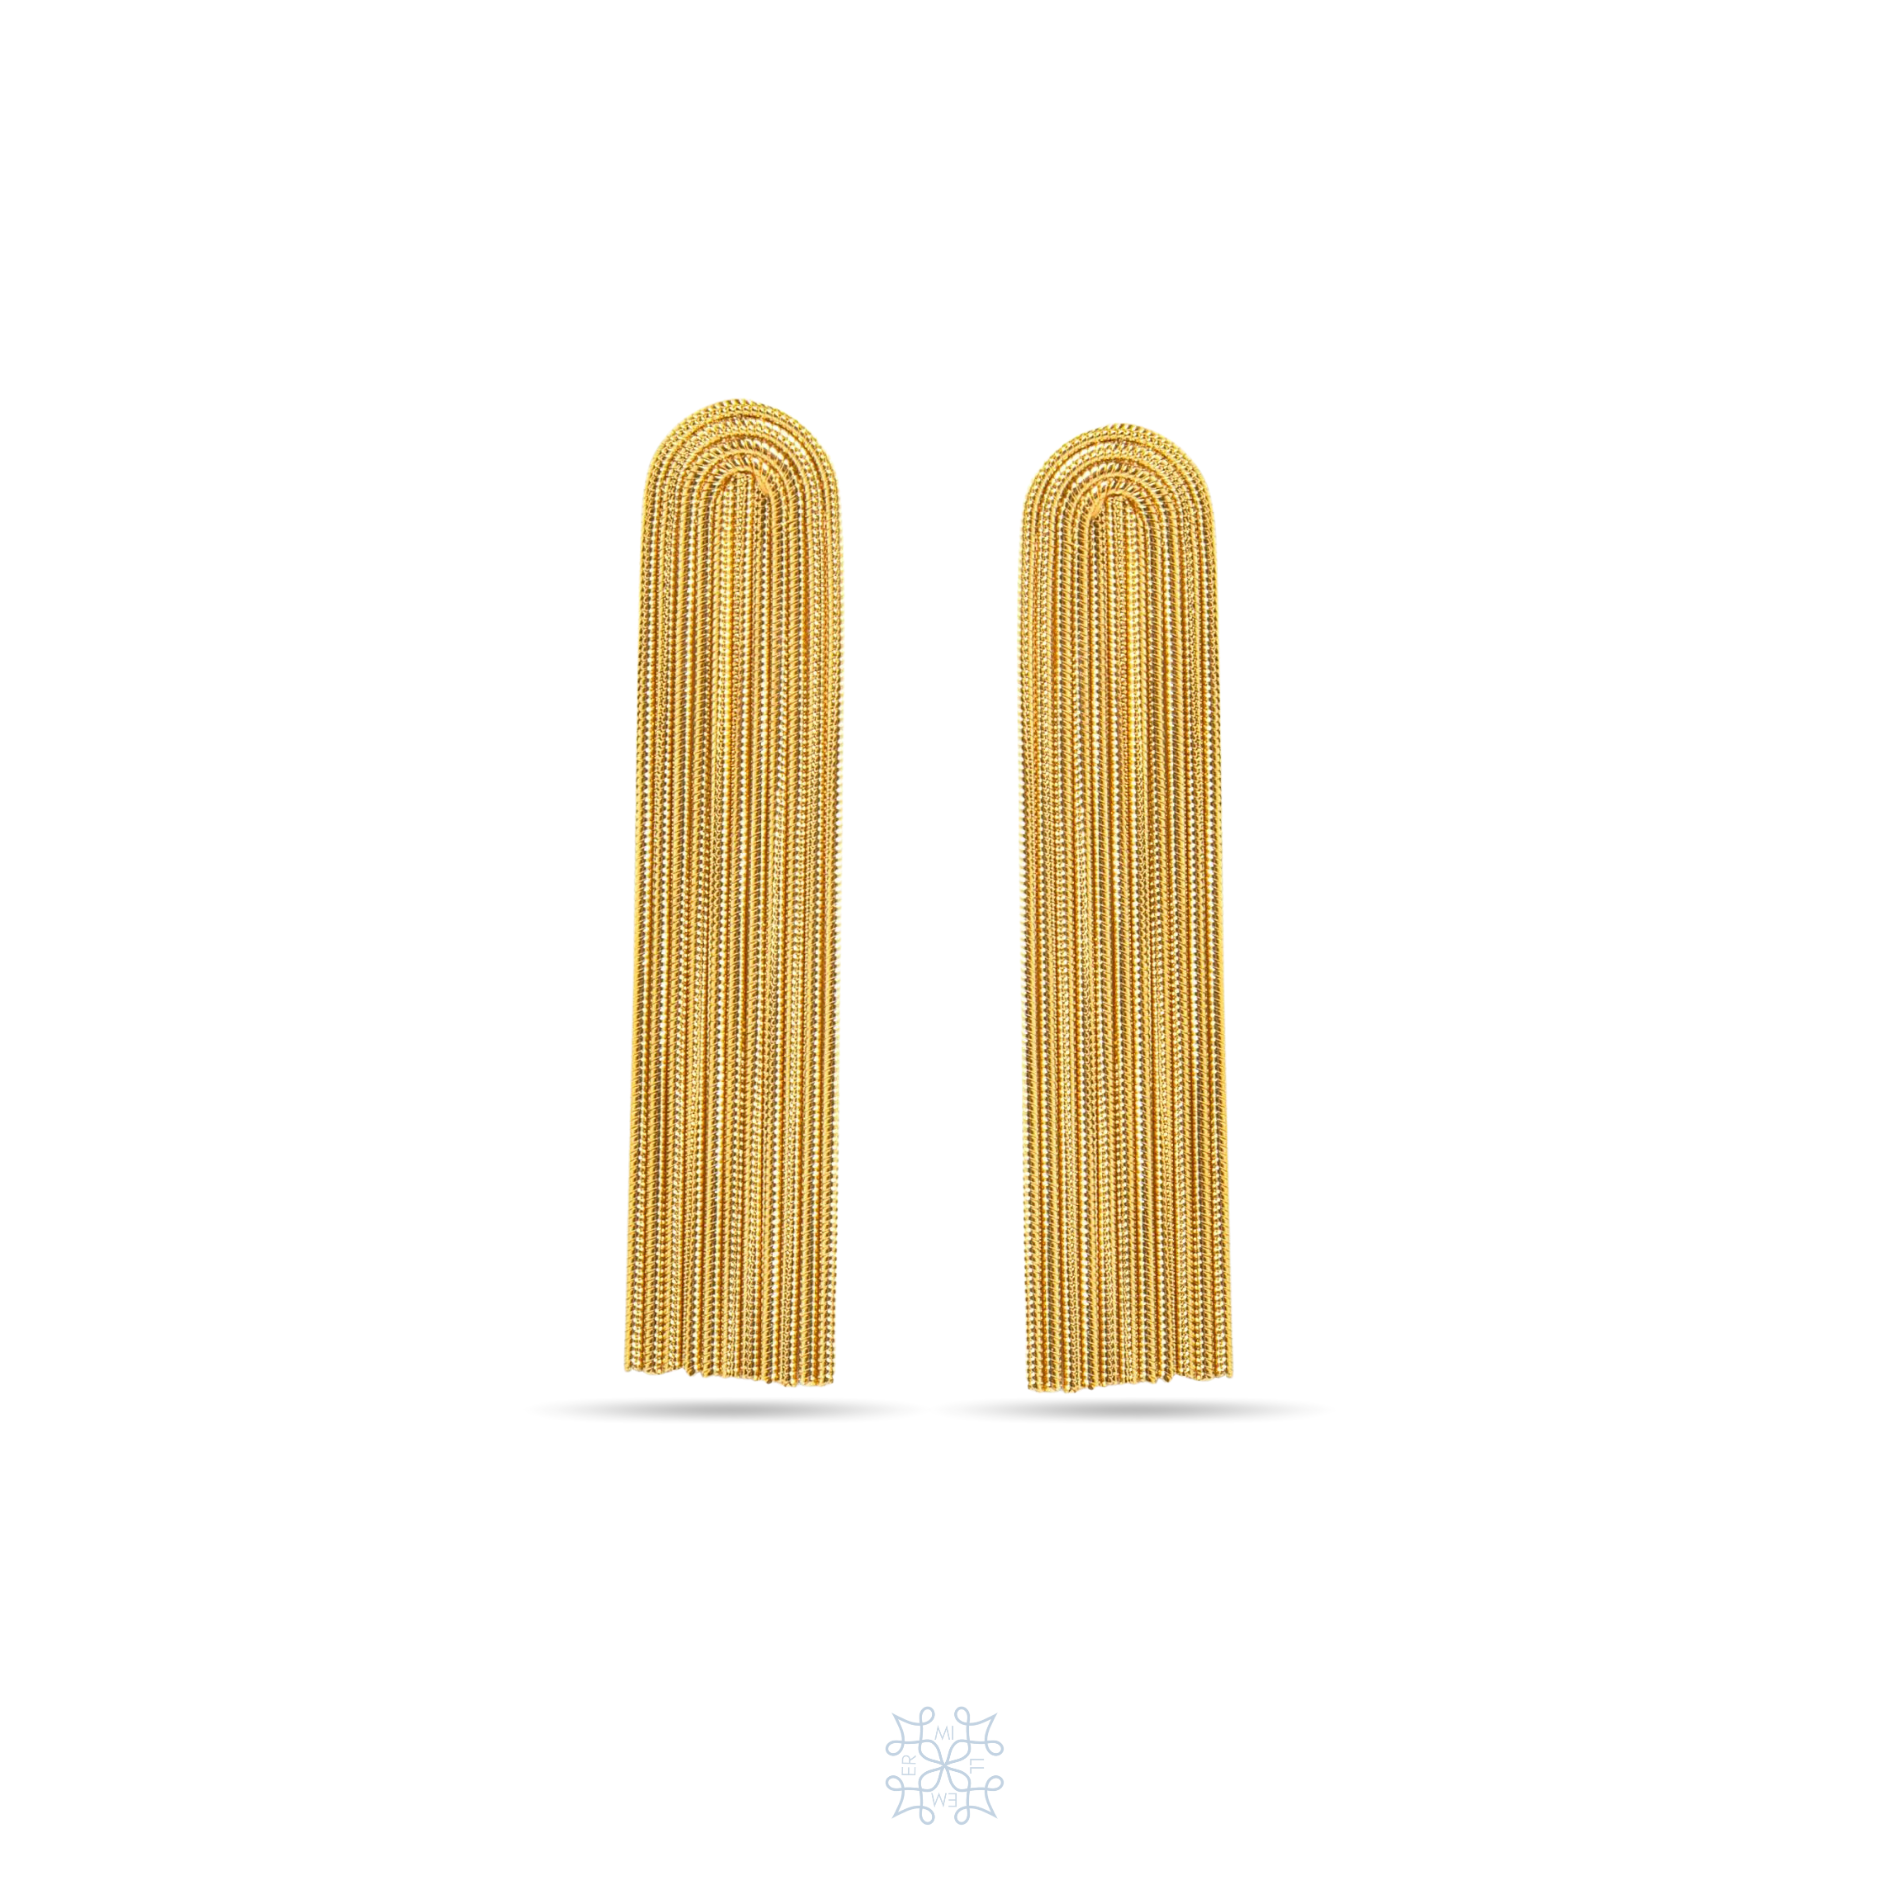 CLEO Gold Drop Earrings. Rustic look with 11 rope lookalike chains droping forming a U half square shape in the post top part of the earrings.